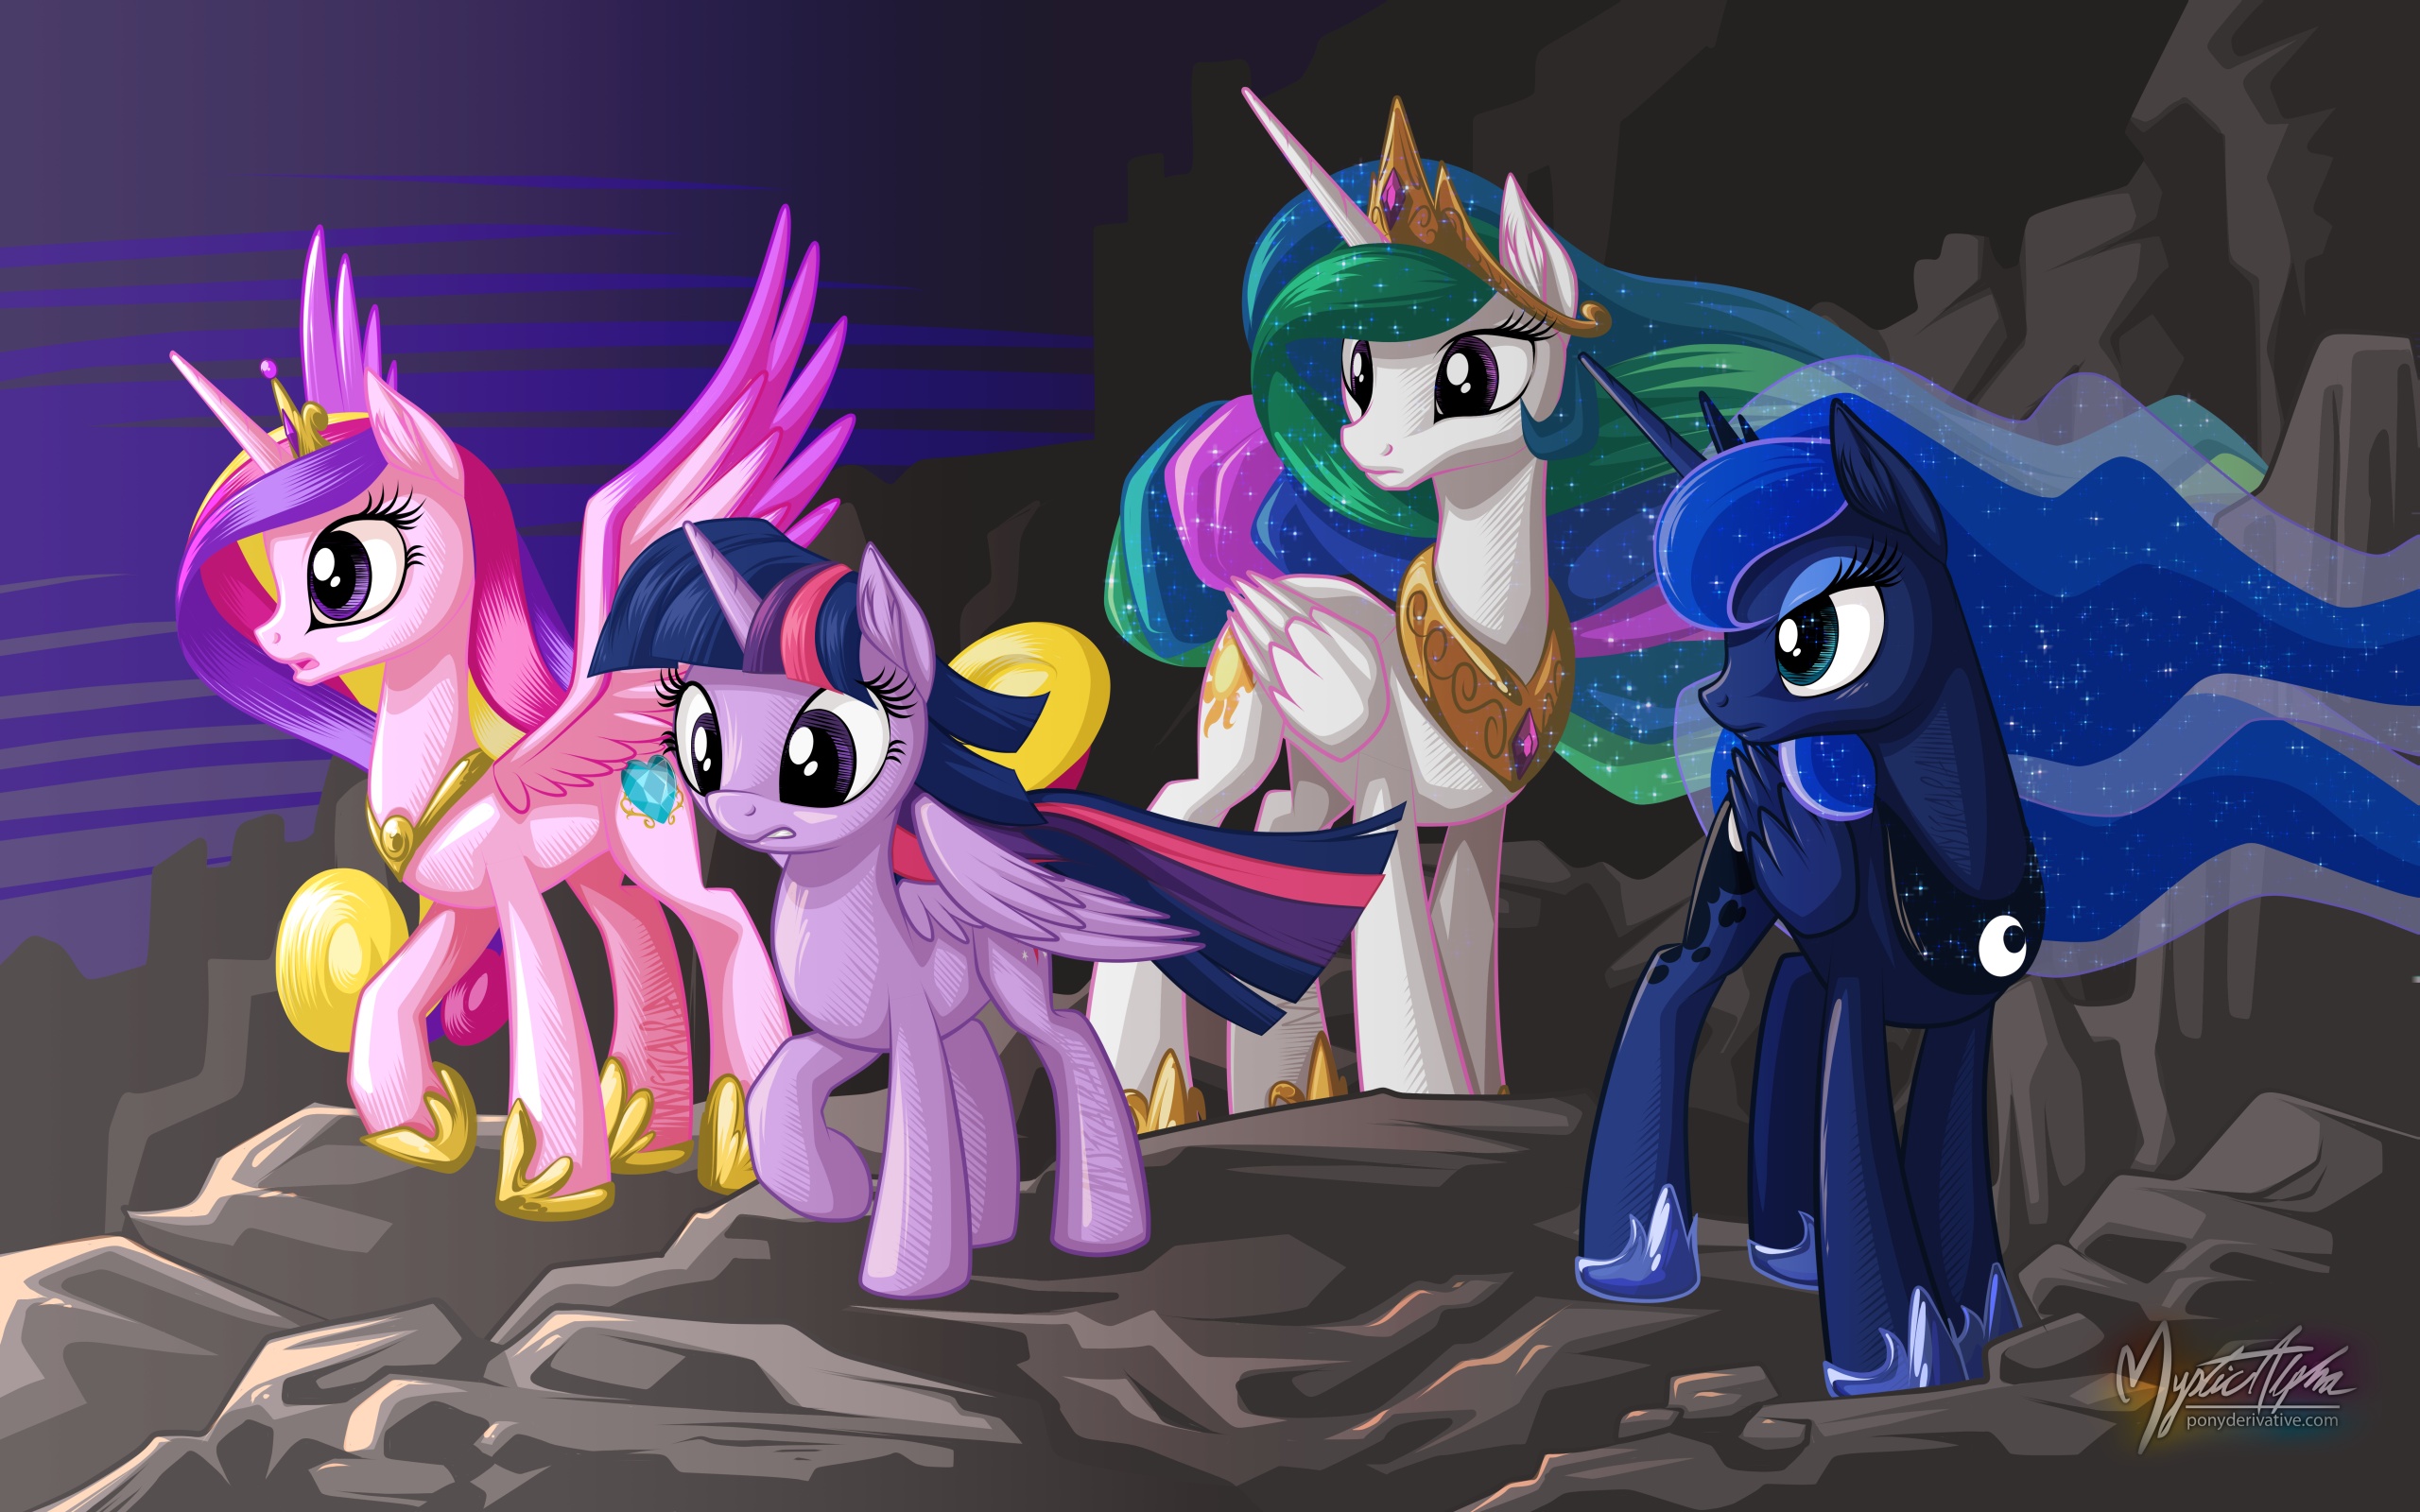 Rally of the Princesses by mysticalpha